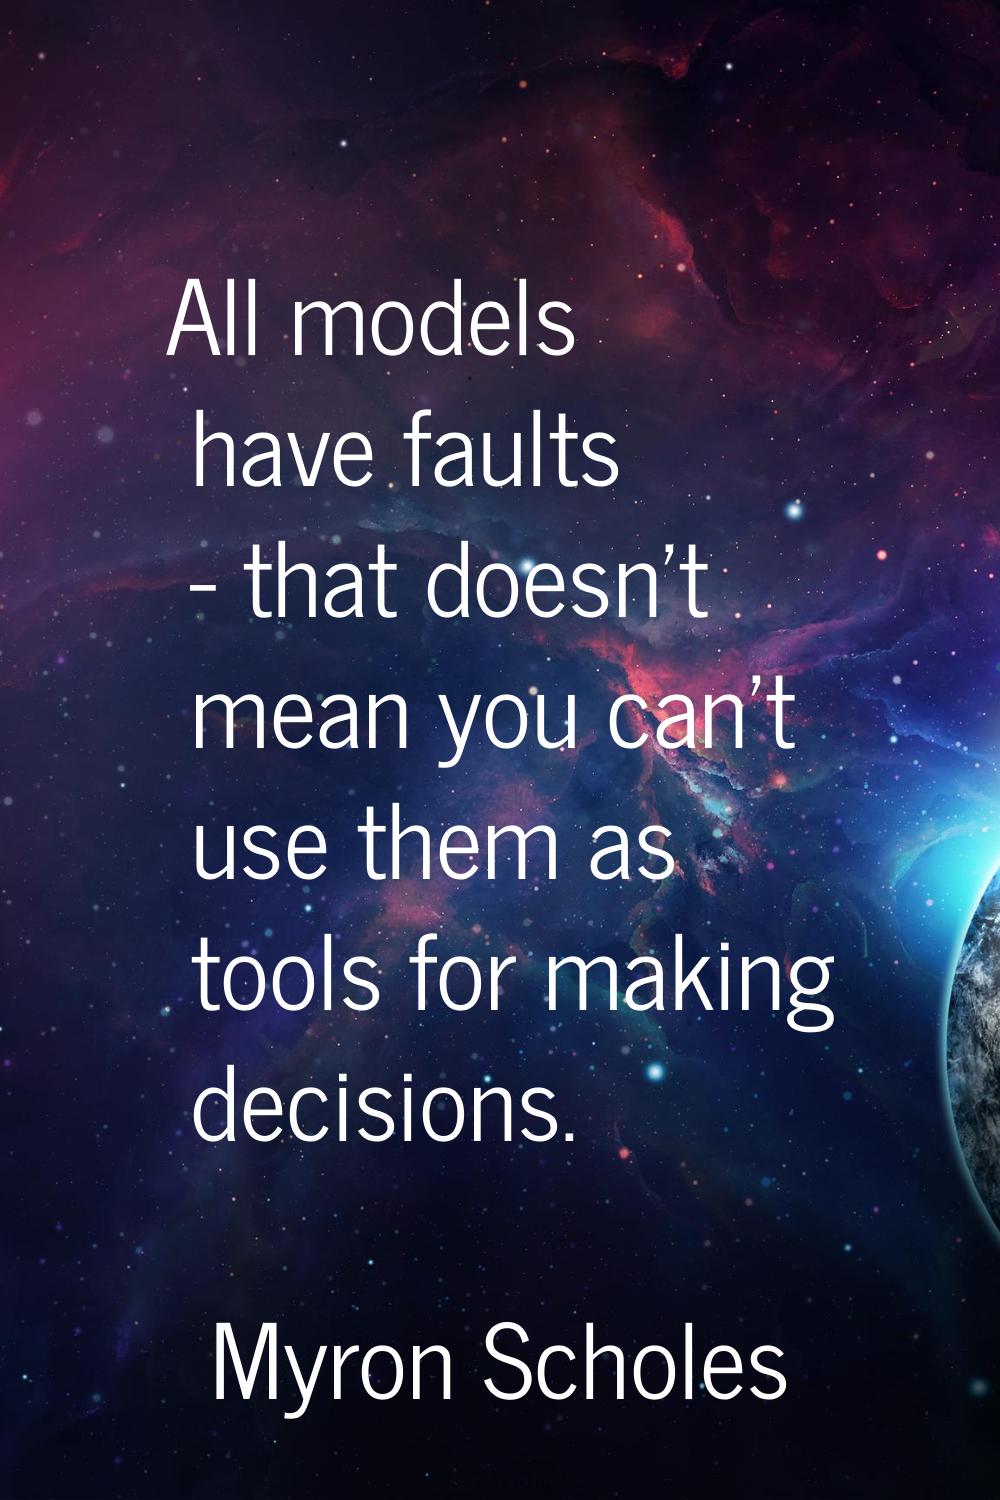 All models have faults - that doesn't mean you can't use them as tools for making decisions.